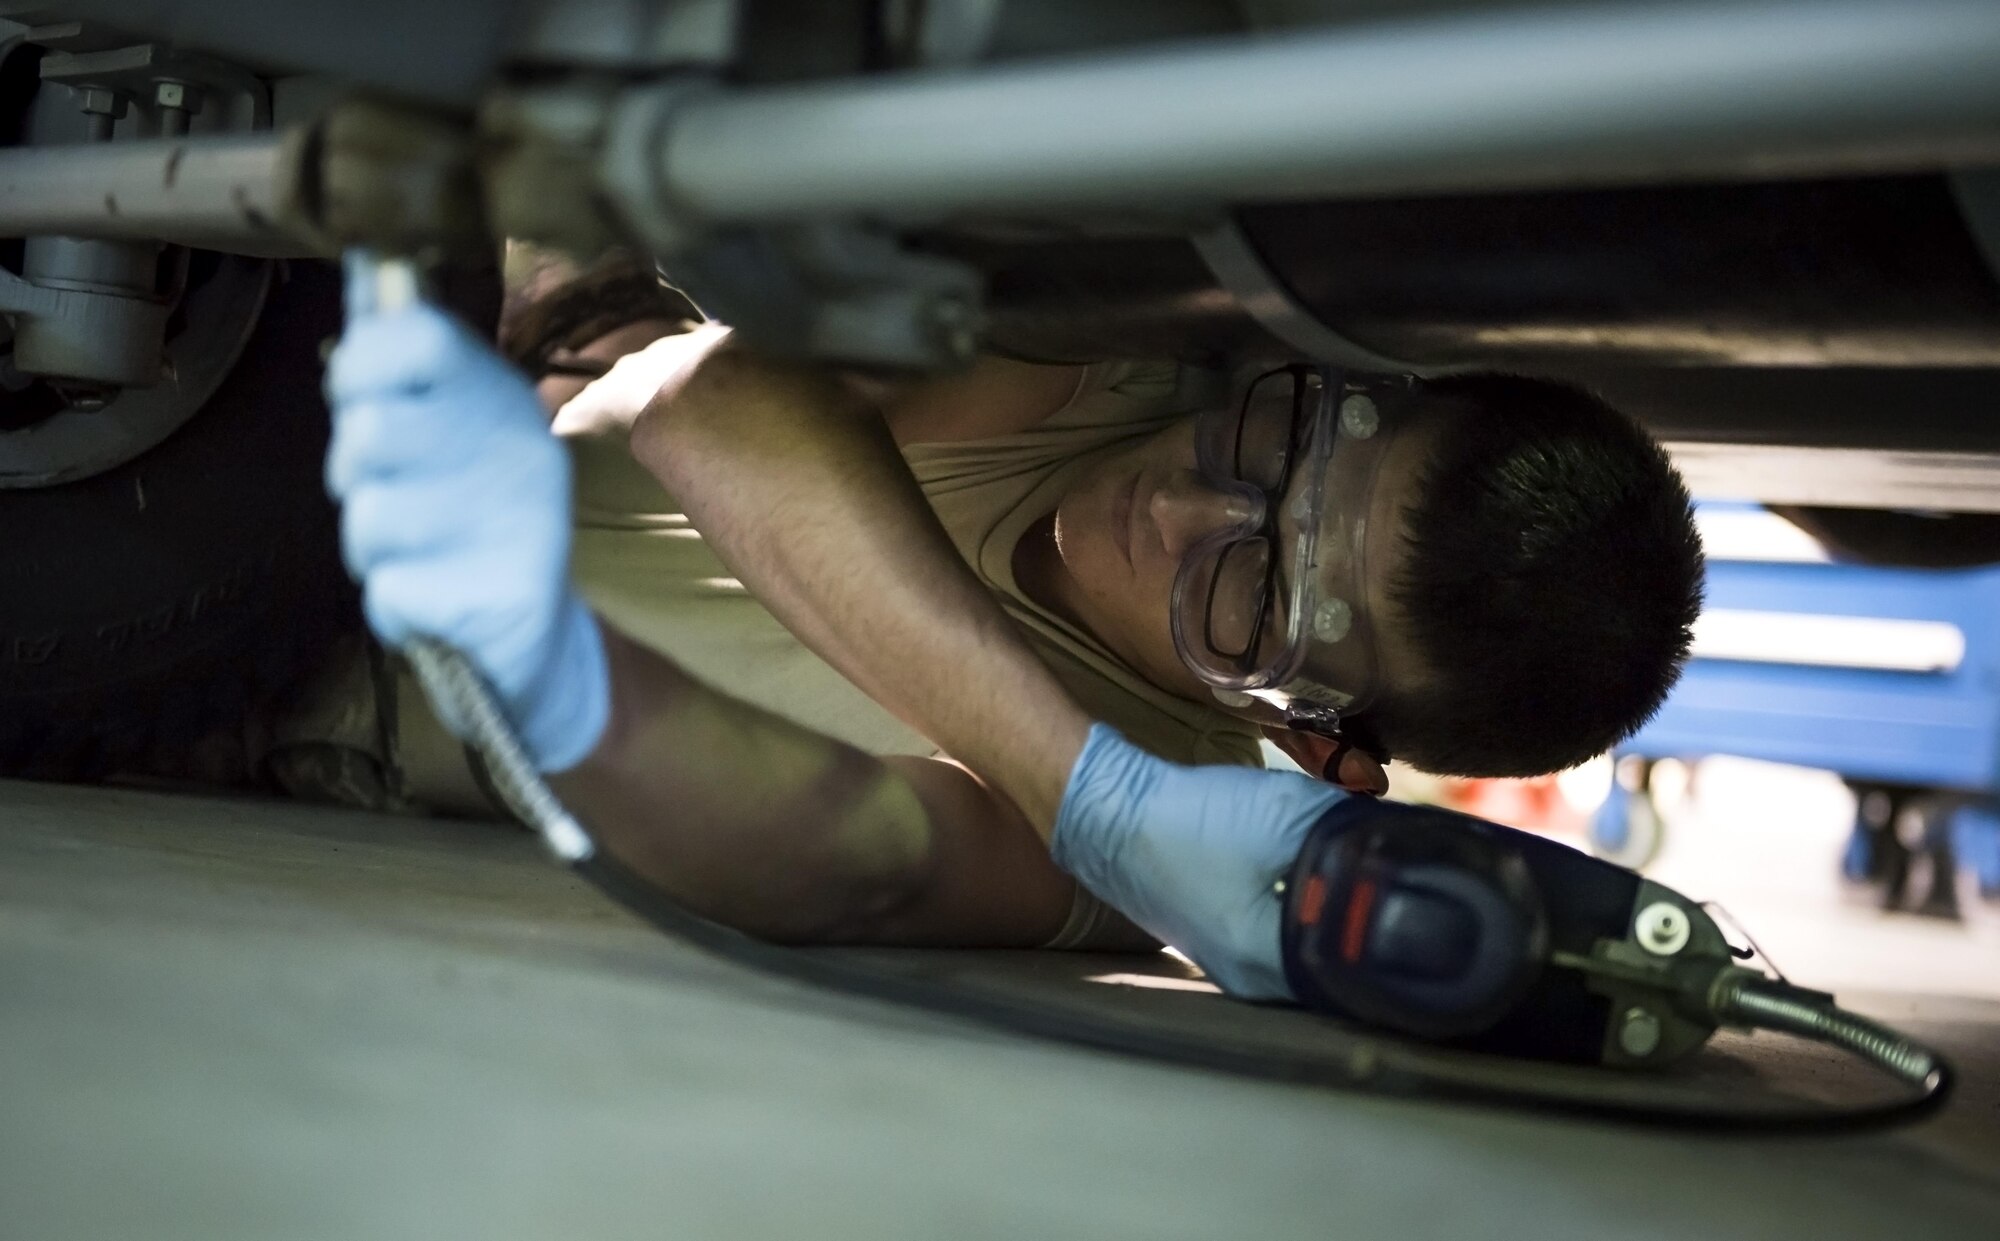 Airman 1st Class Jonathan Lake, 113th Maintenance Squadron aerospace ground equipment apprentice, tightens a bolt on an air conditioning unit at Joint Base Andrews, Md., March 27, 2017. The D.C. Air National Guard has various missions including defending the National Capital Region, supporting the District and local communities during special security events and natural disasters, and maintaining a worldwide deployable fighter and support force. (U.S. Air Force photo by Airman 1st Class Gabrielle Spalding)